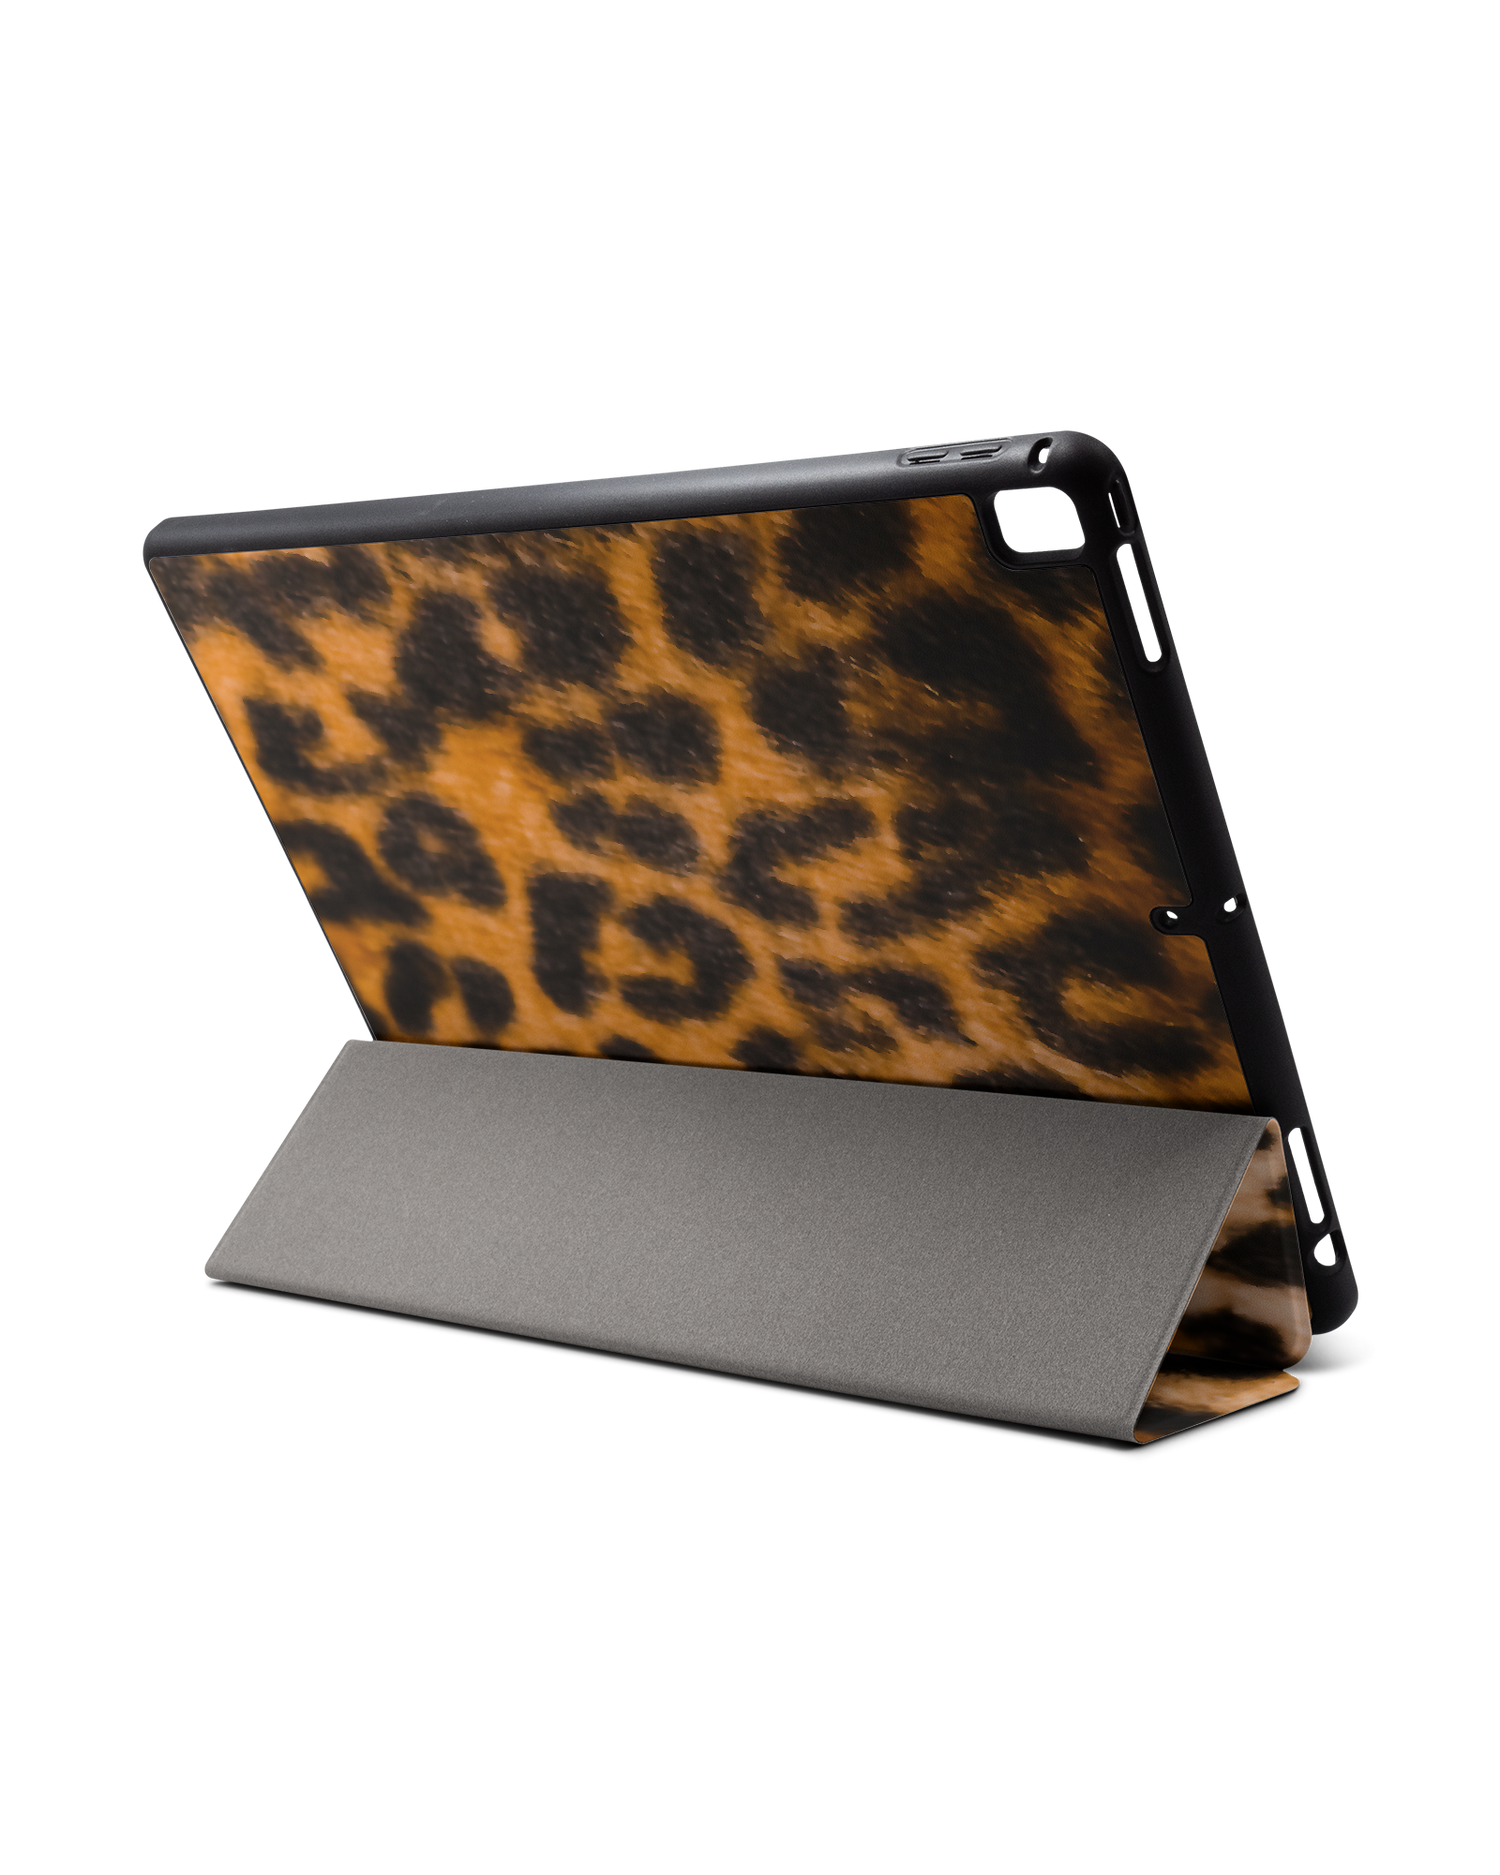 Leopard Pattern iPad Case with Pencil Holder for Apple iPad Pro 2 12.9